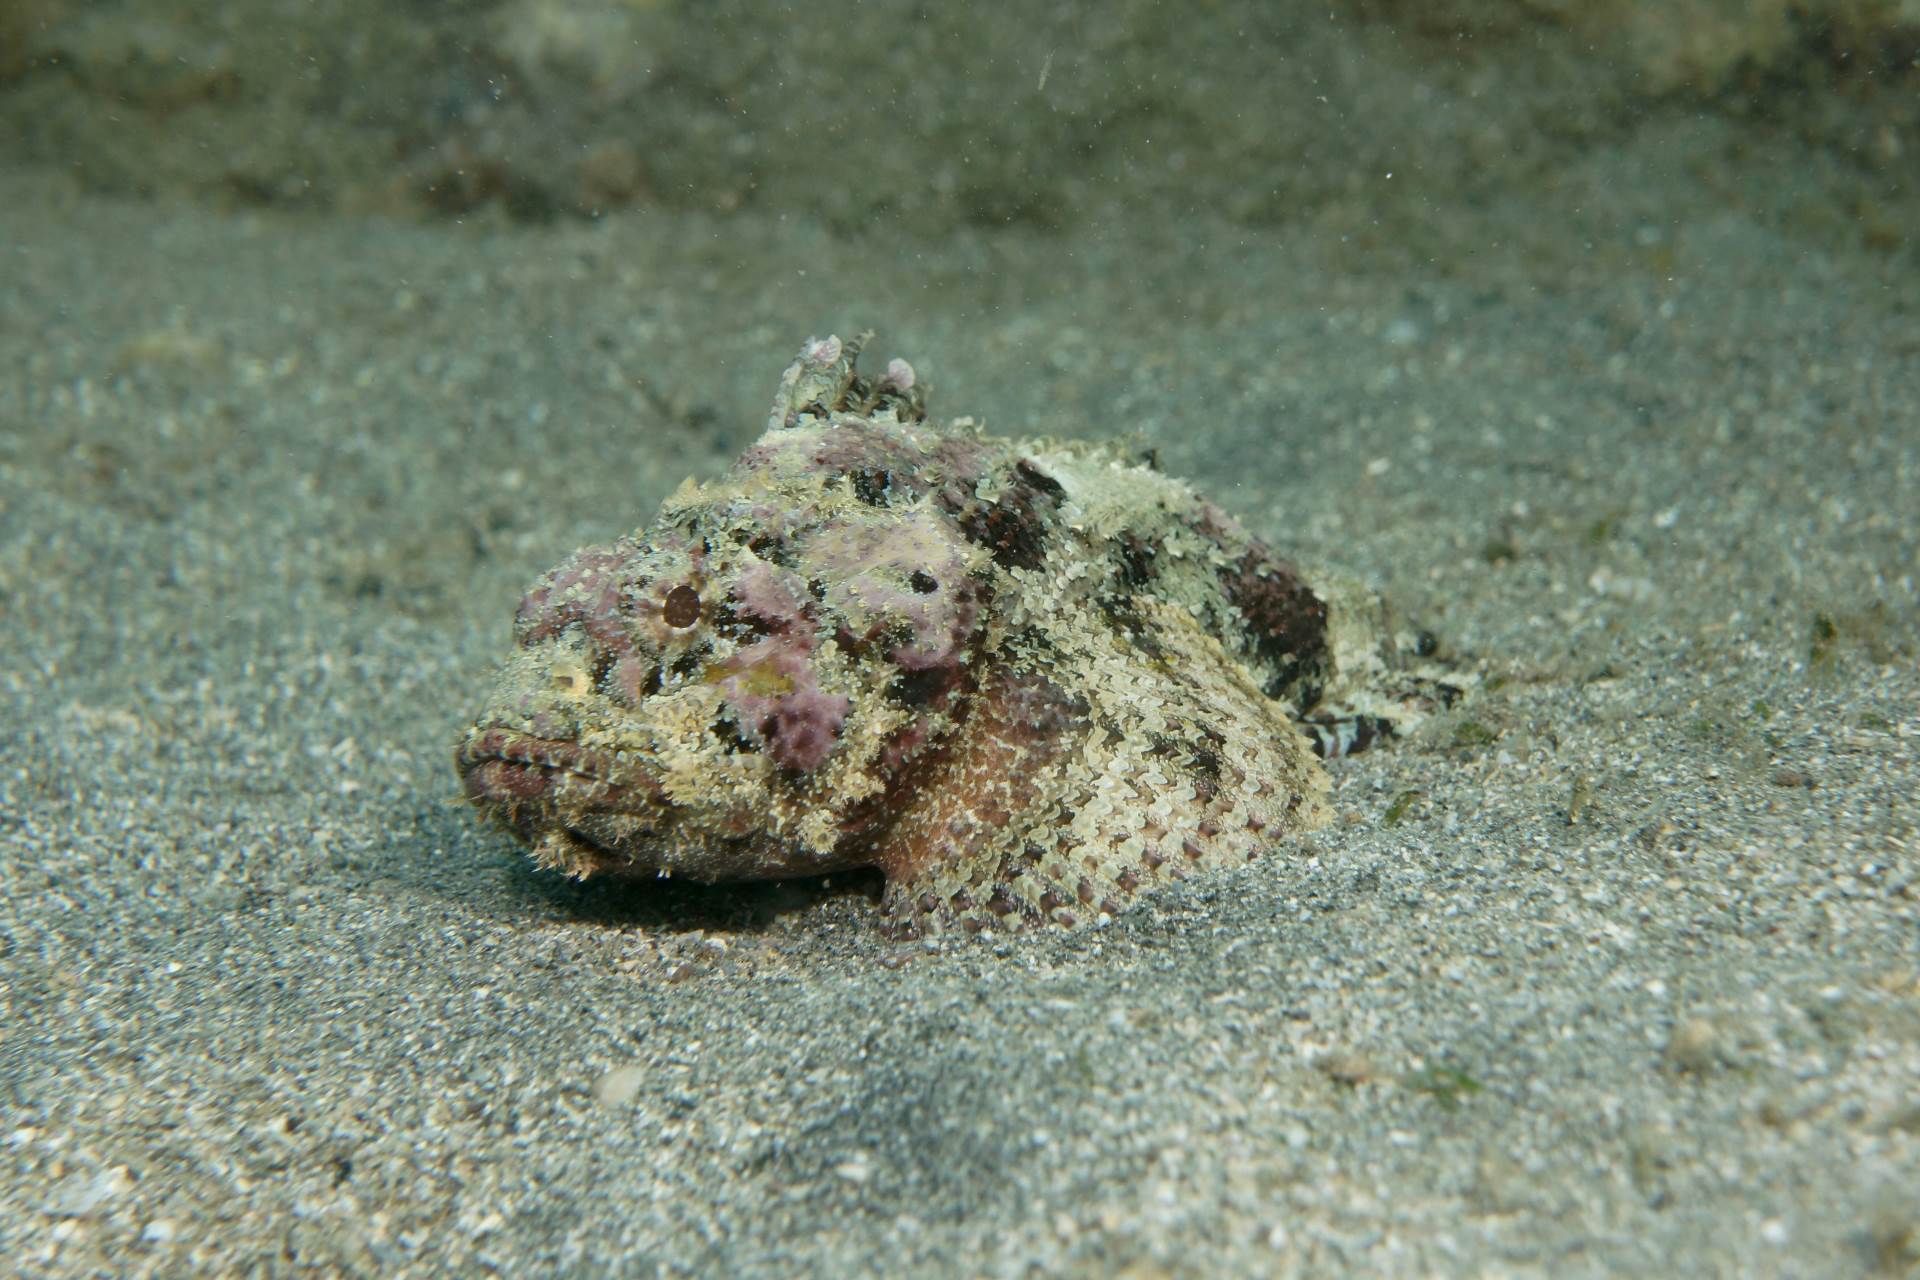 please feature this on your instagram (photo credit goes to @photographylife.4u)

a nevisian scorpianfish